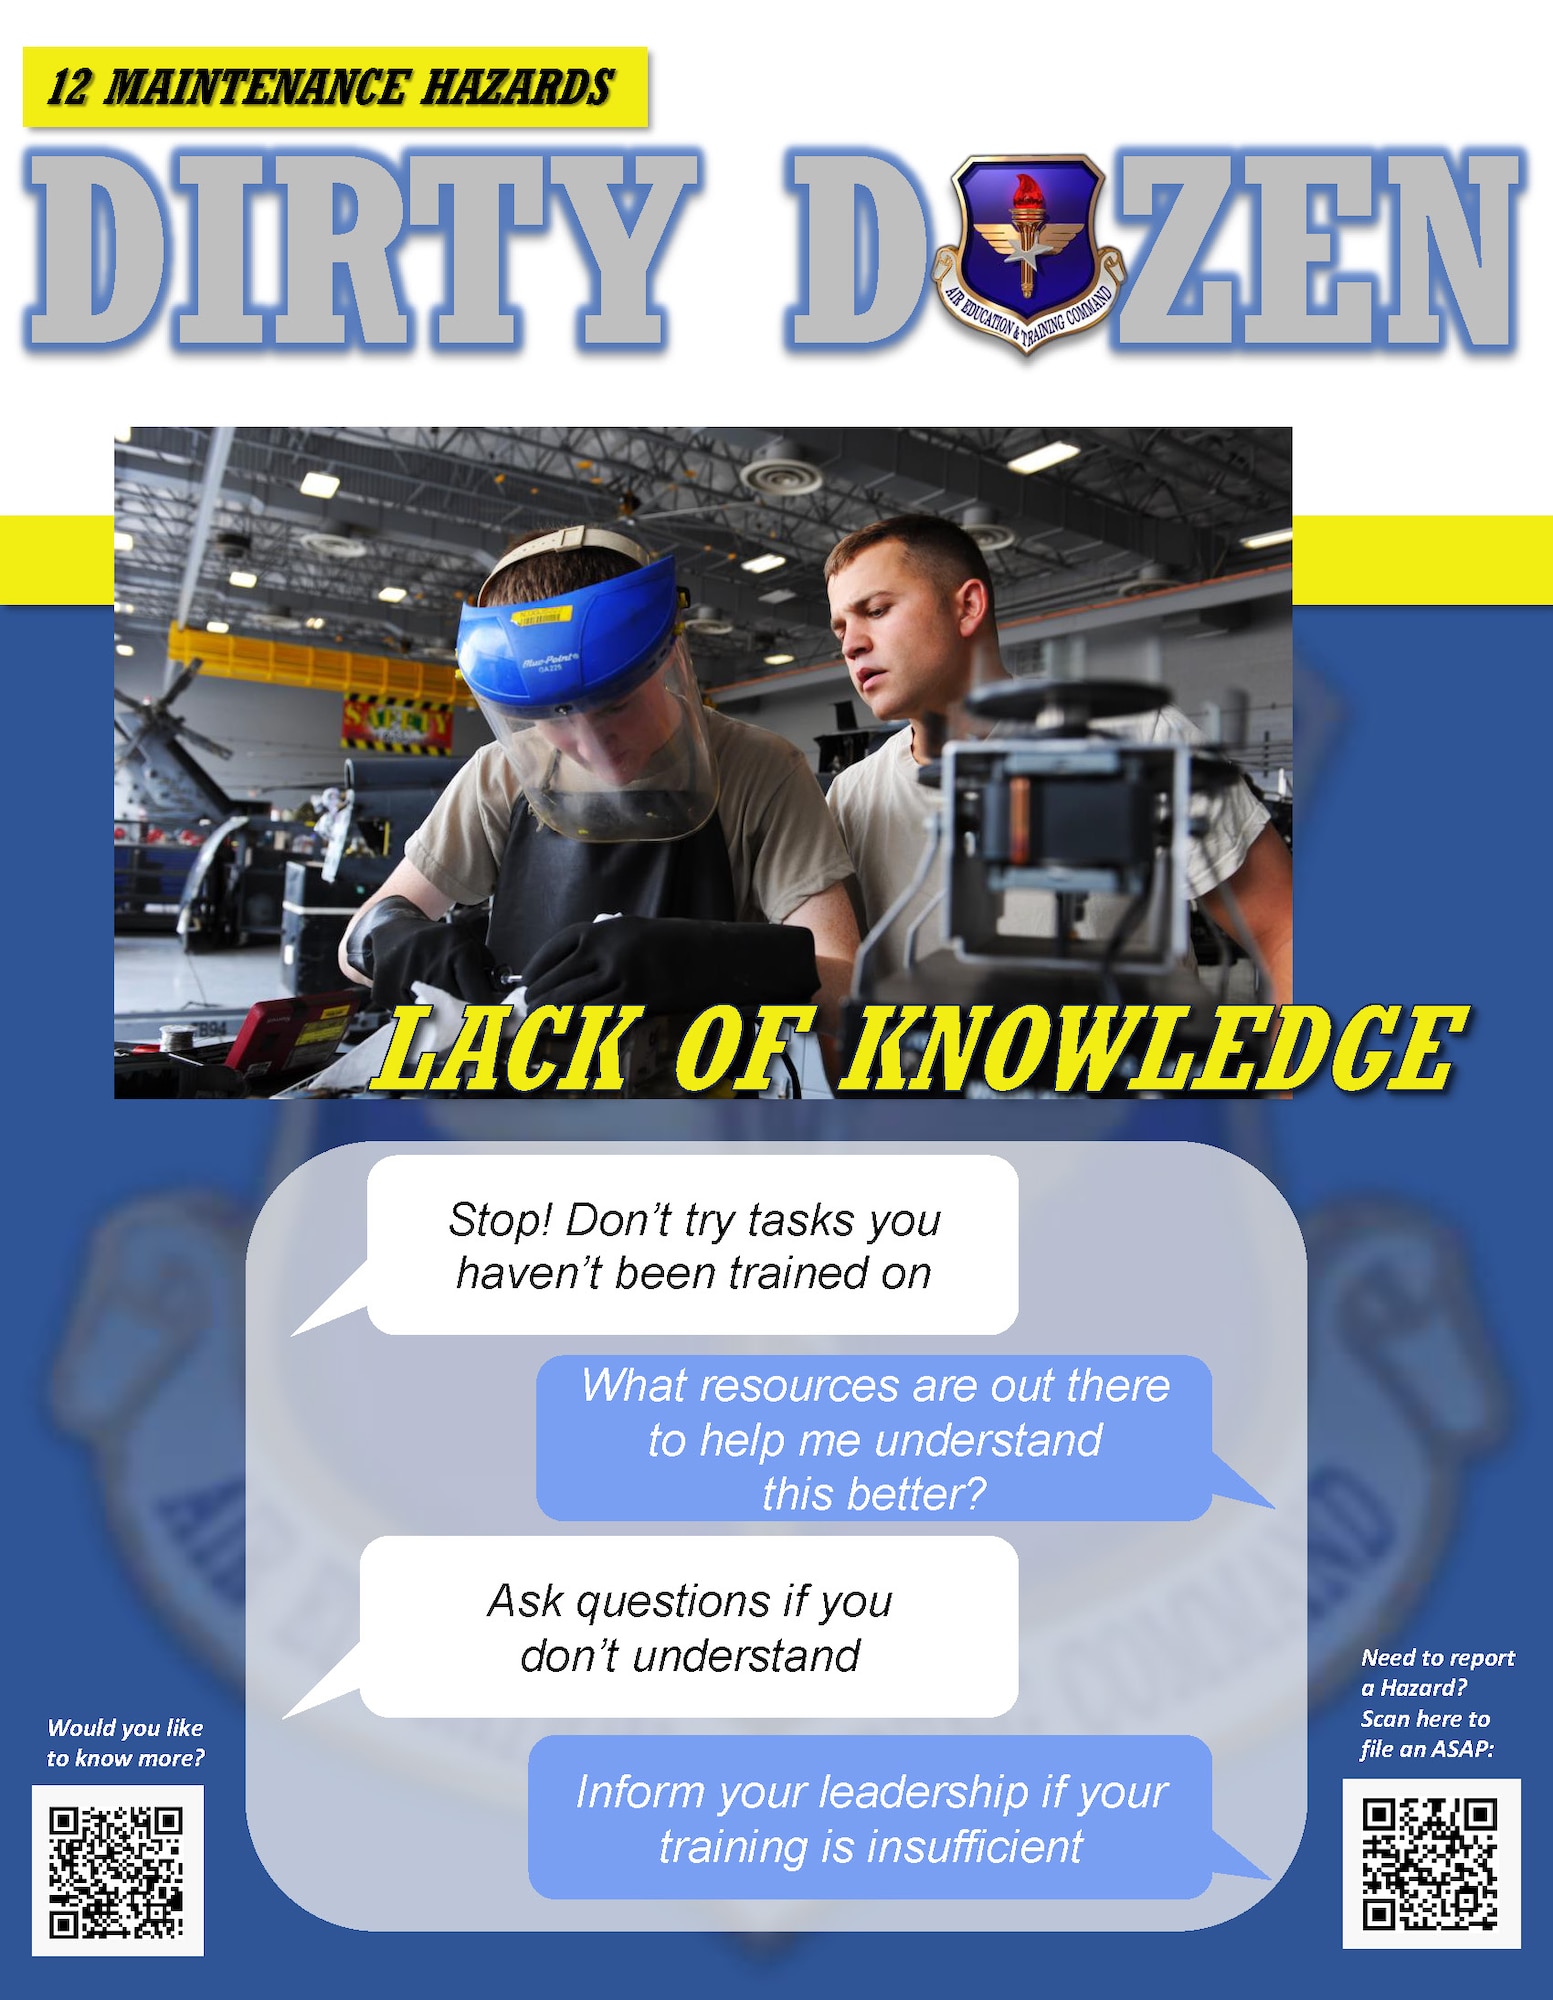 Lack of knowledge is one of the Dirty Dozen, which highlights common human error factors in aircraft maintenance mishaps.